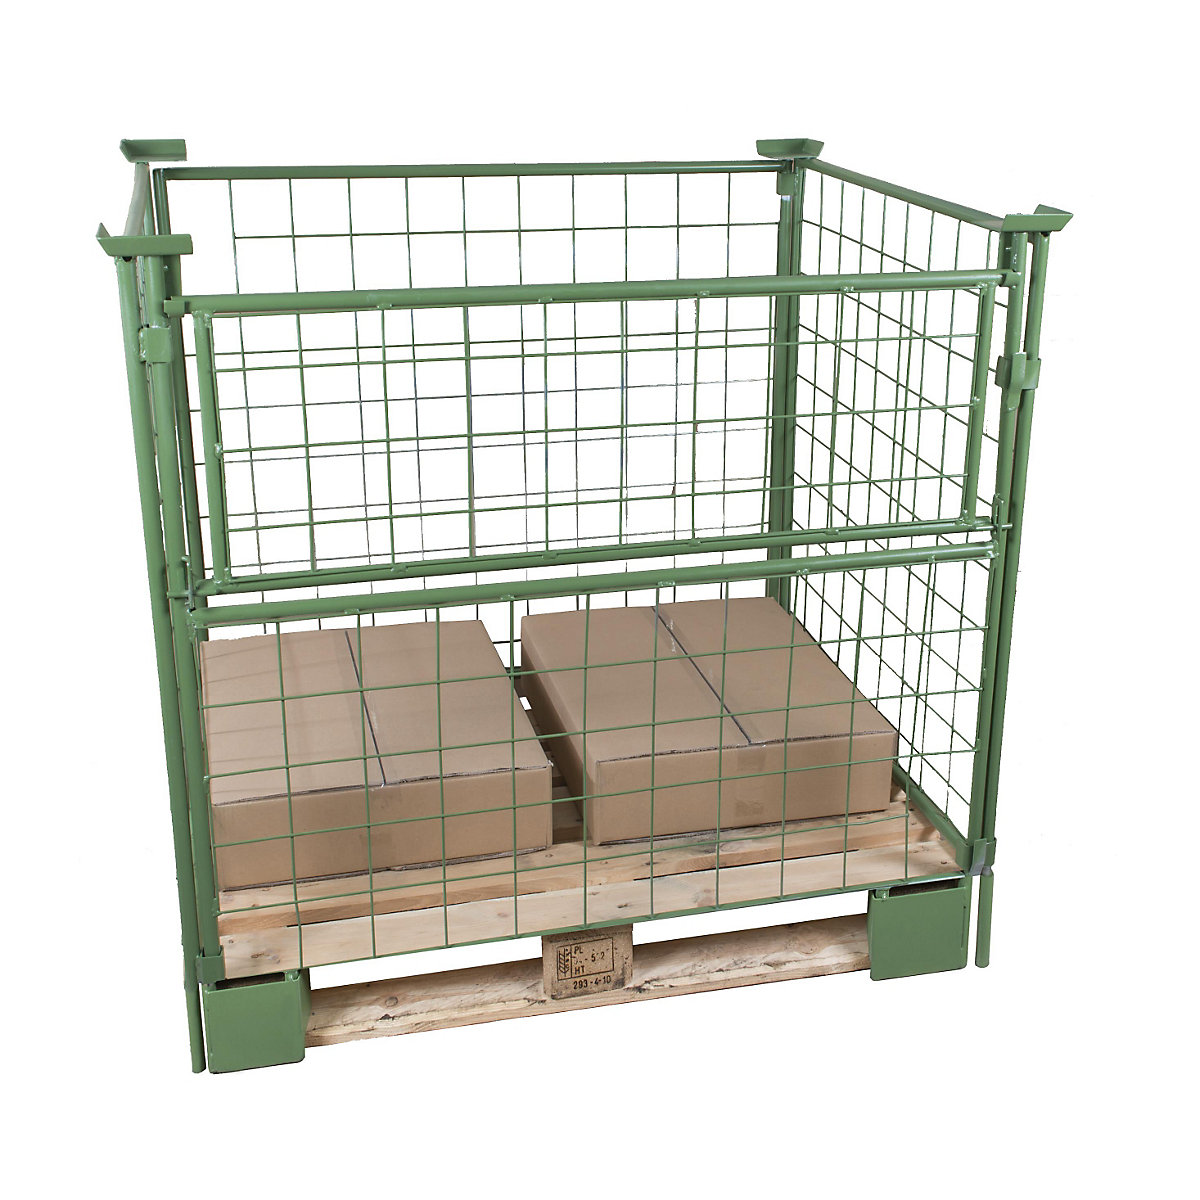 Pallet frame, effective height 1600 mm, for stacking, WxL 800 x 1200 mm, 1 long side can be half folded-2